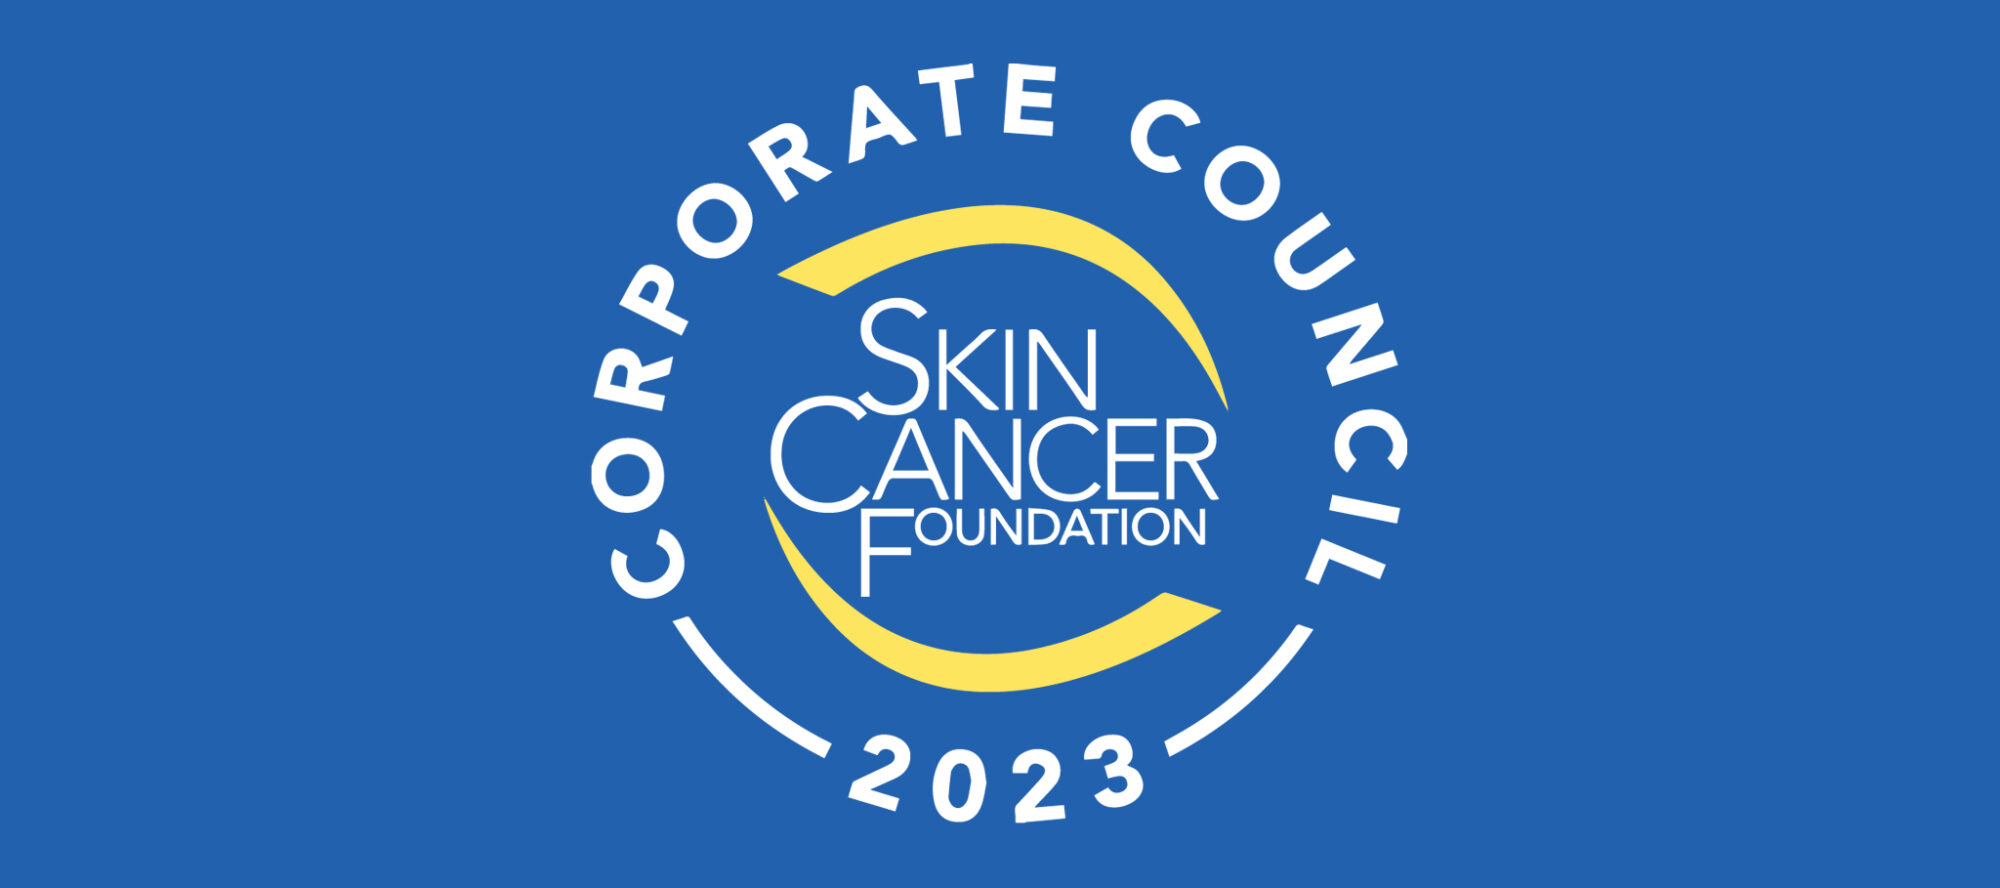 Amway and The Skin Cancer Foundation